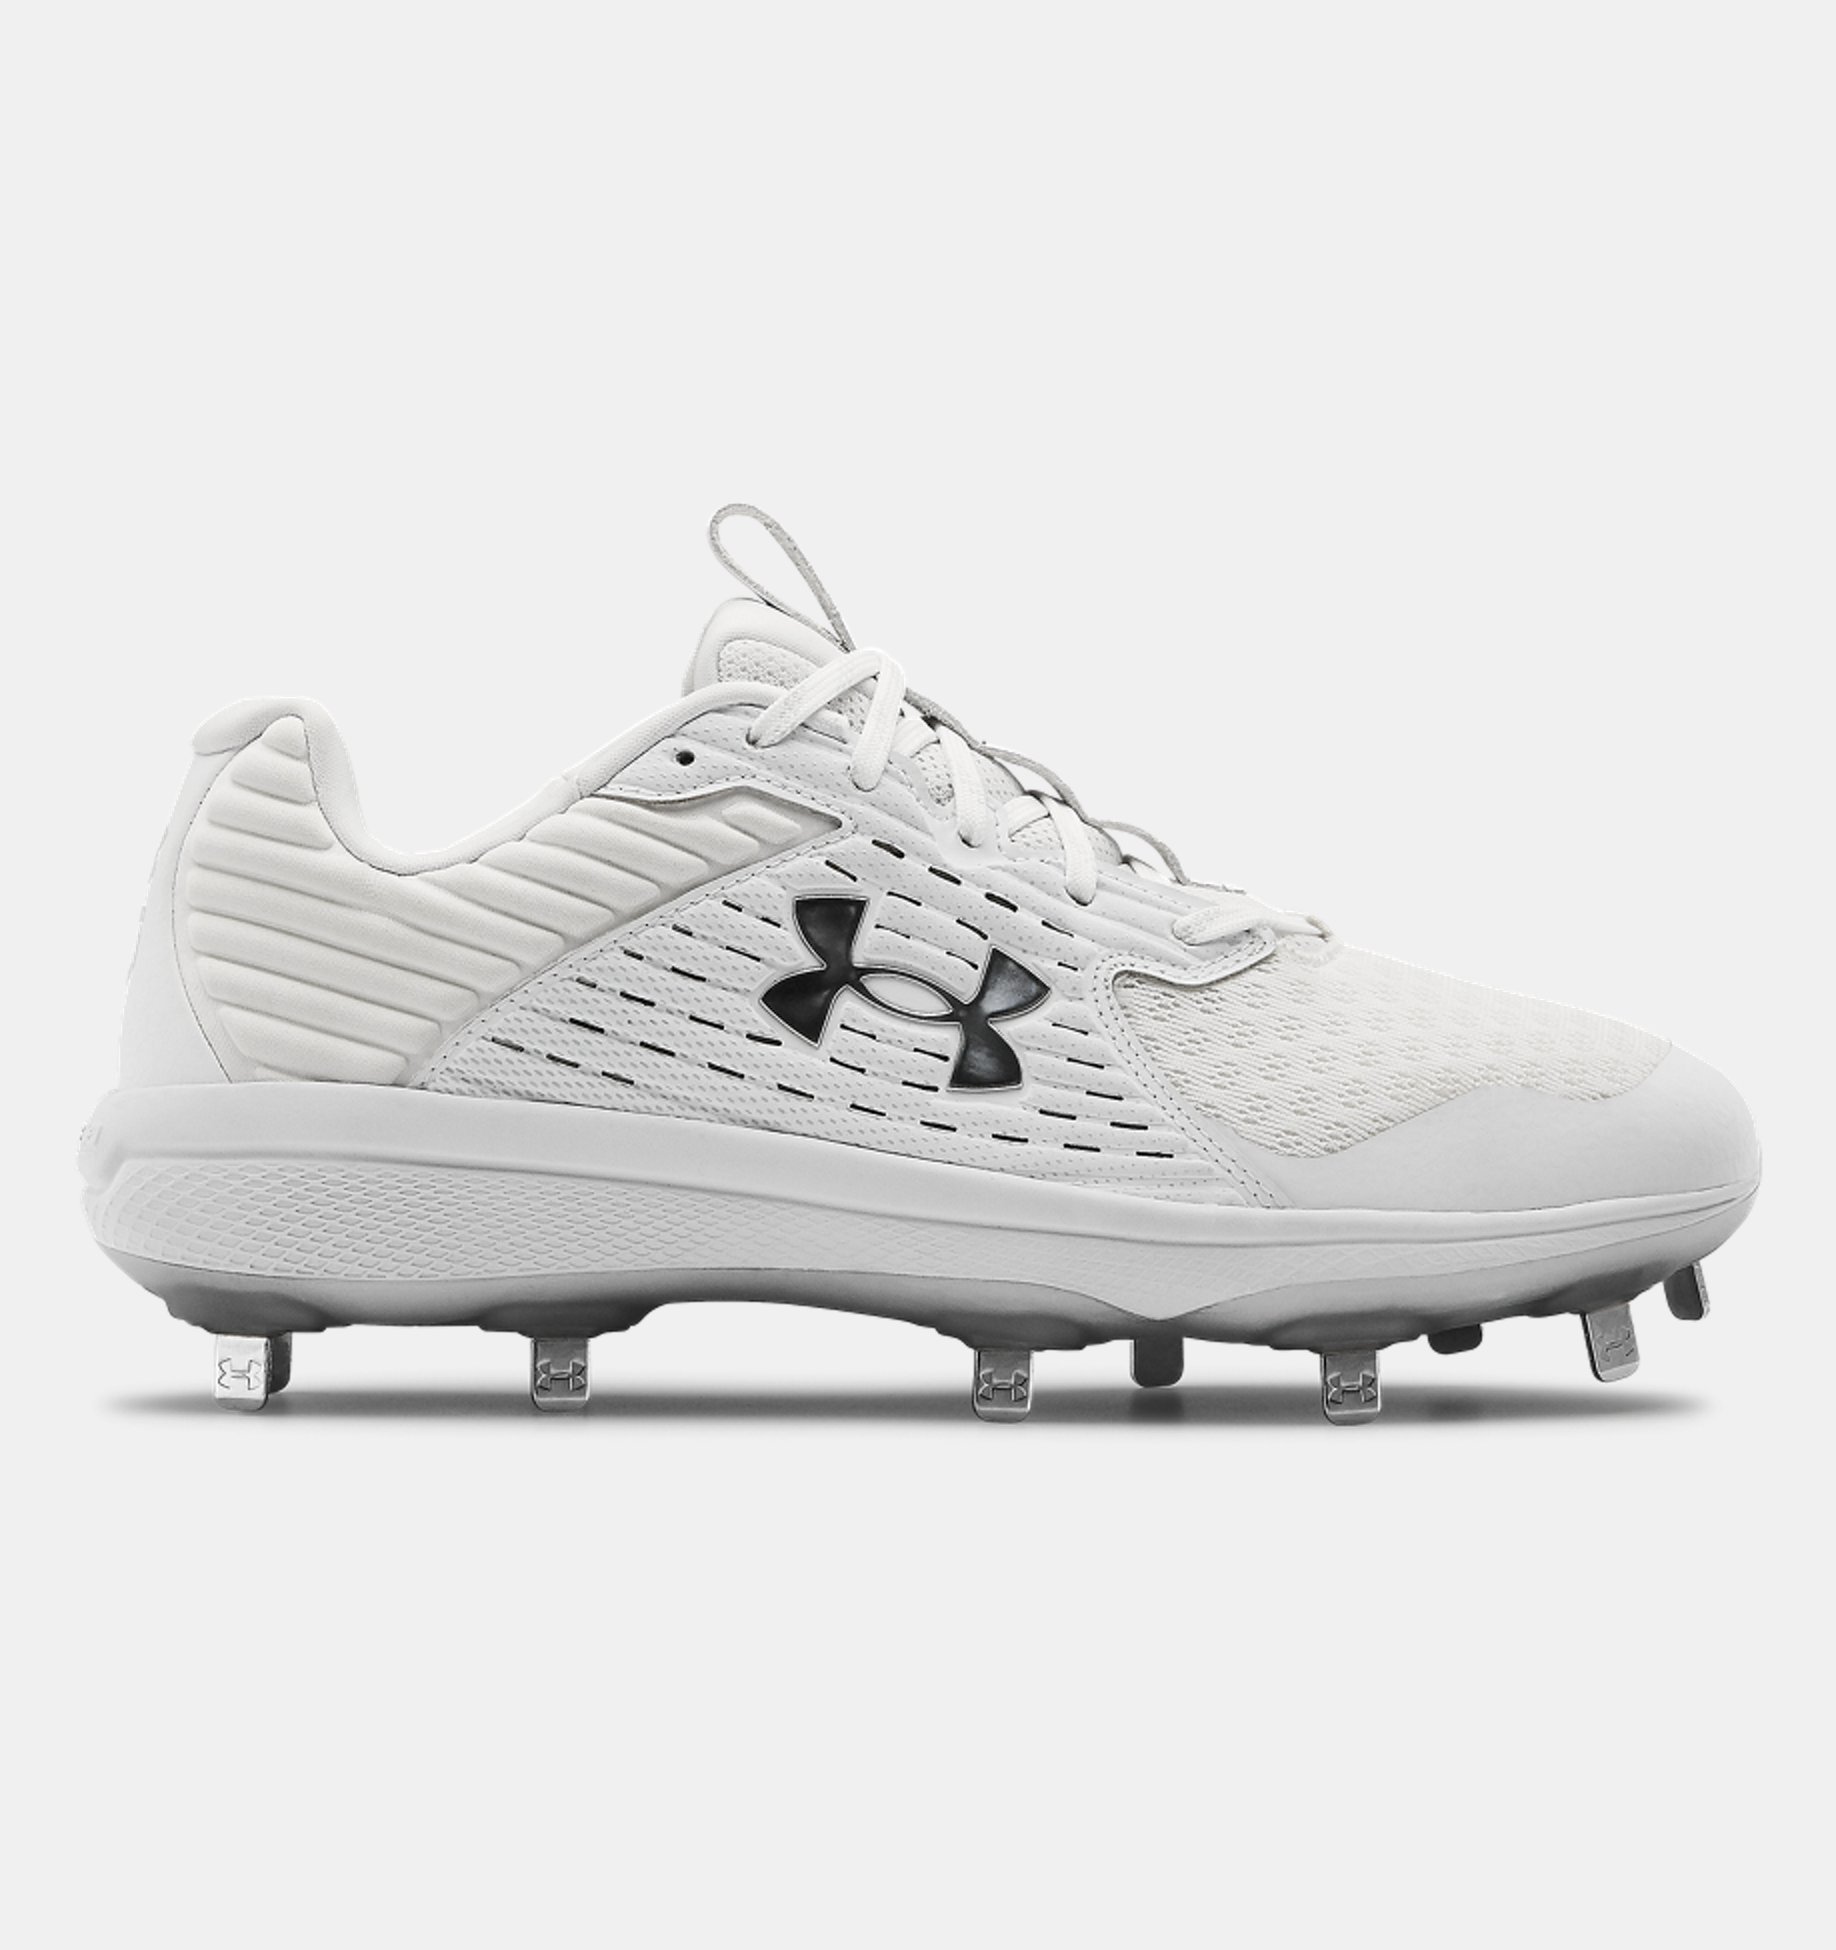 Under Armour Men's Yard Low ST Metal Baseball Cleats 